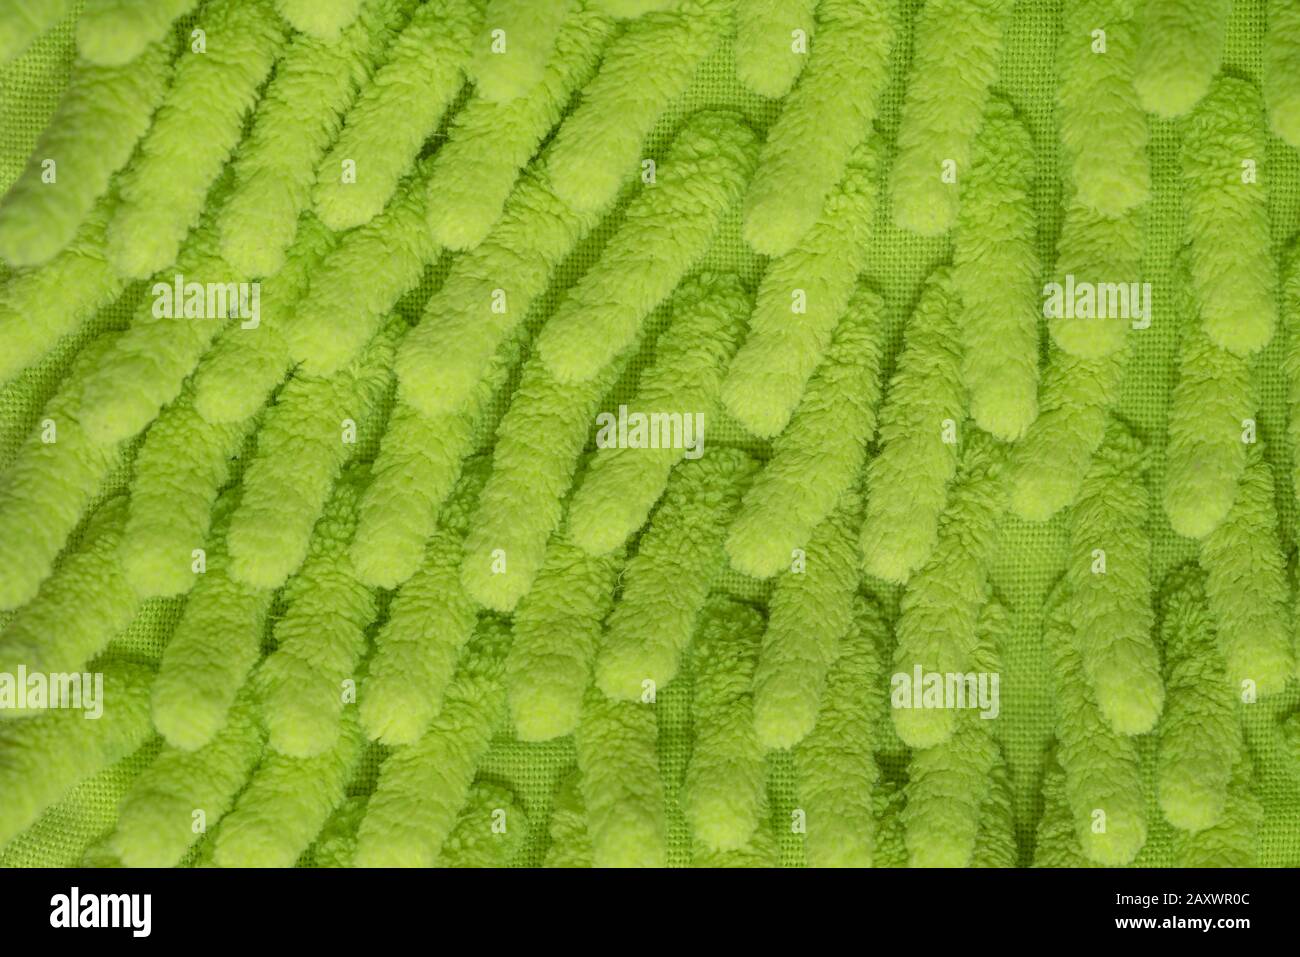 Green microfiber cleaning glove sponges for cleaning and a environmental skin friendly close up Stock Photo